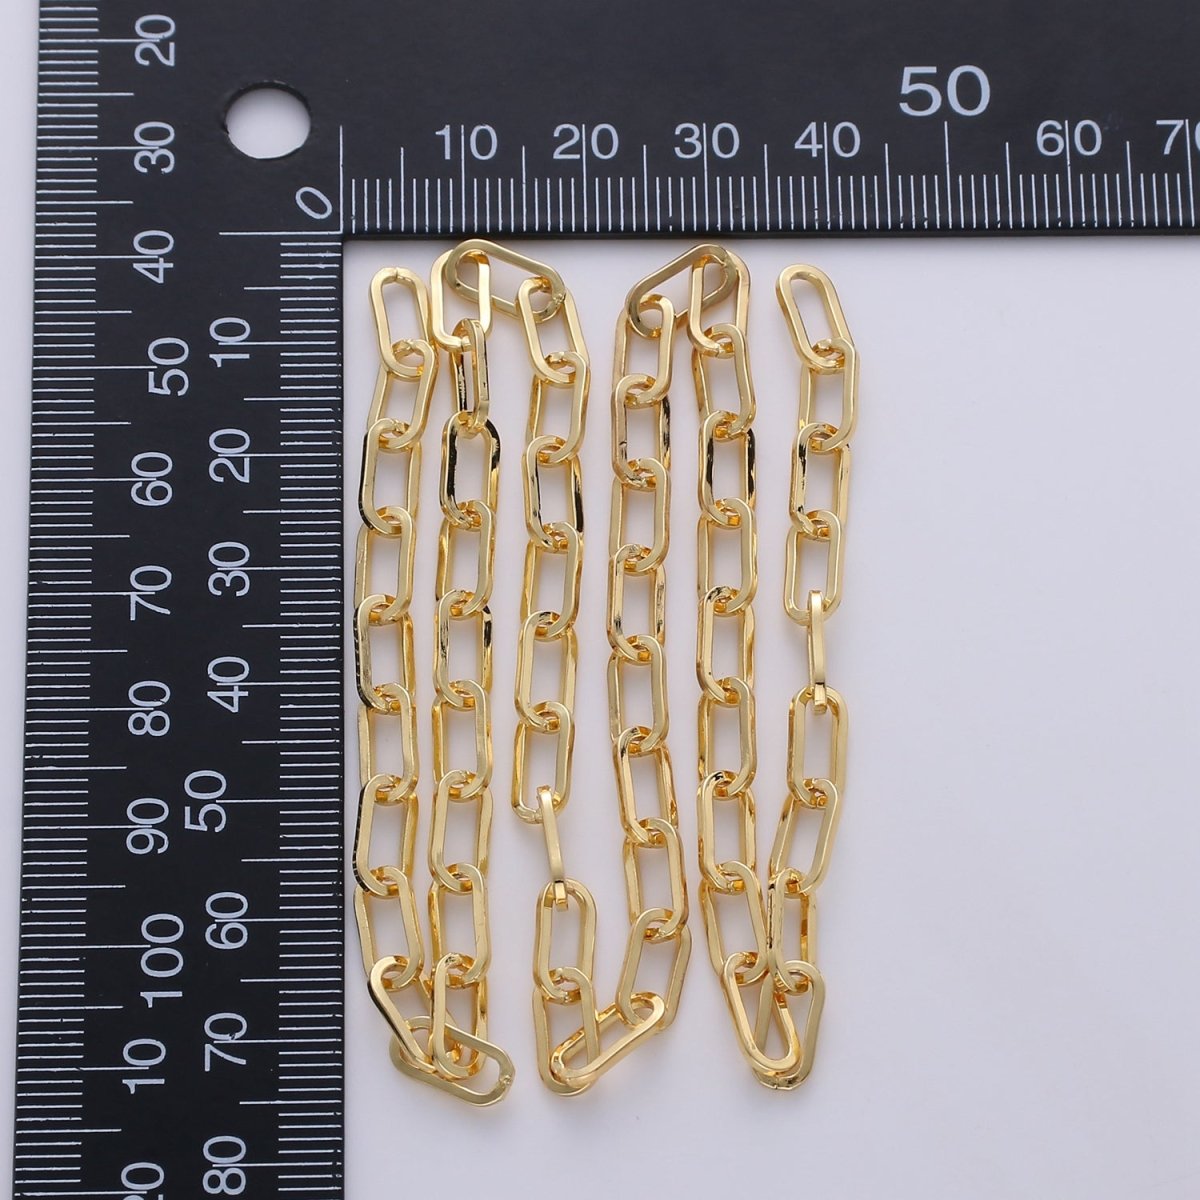 Dainty Gold Paper Clip Chain, 10X5mm24K Gold Filled Unfinished Chain, Nickel Free, Medium Flat Minimalist Jewelry Making Necklace Chain | ROLL-241 Clearance Pricing - DLUXCA